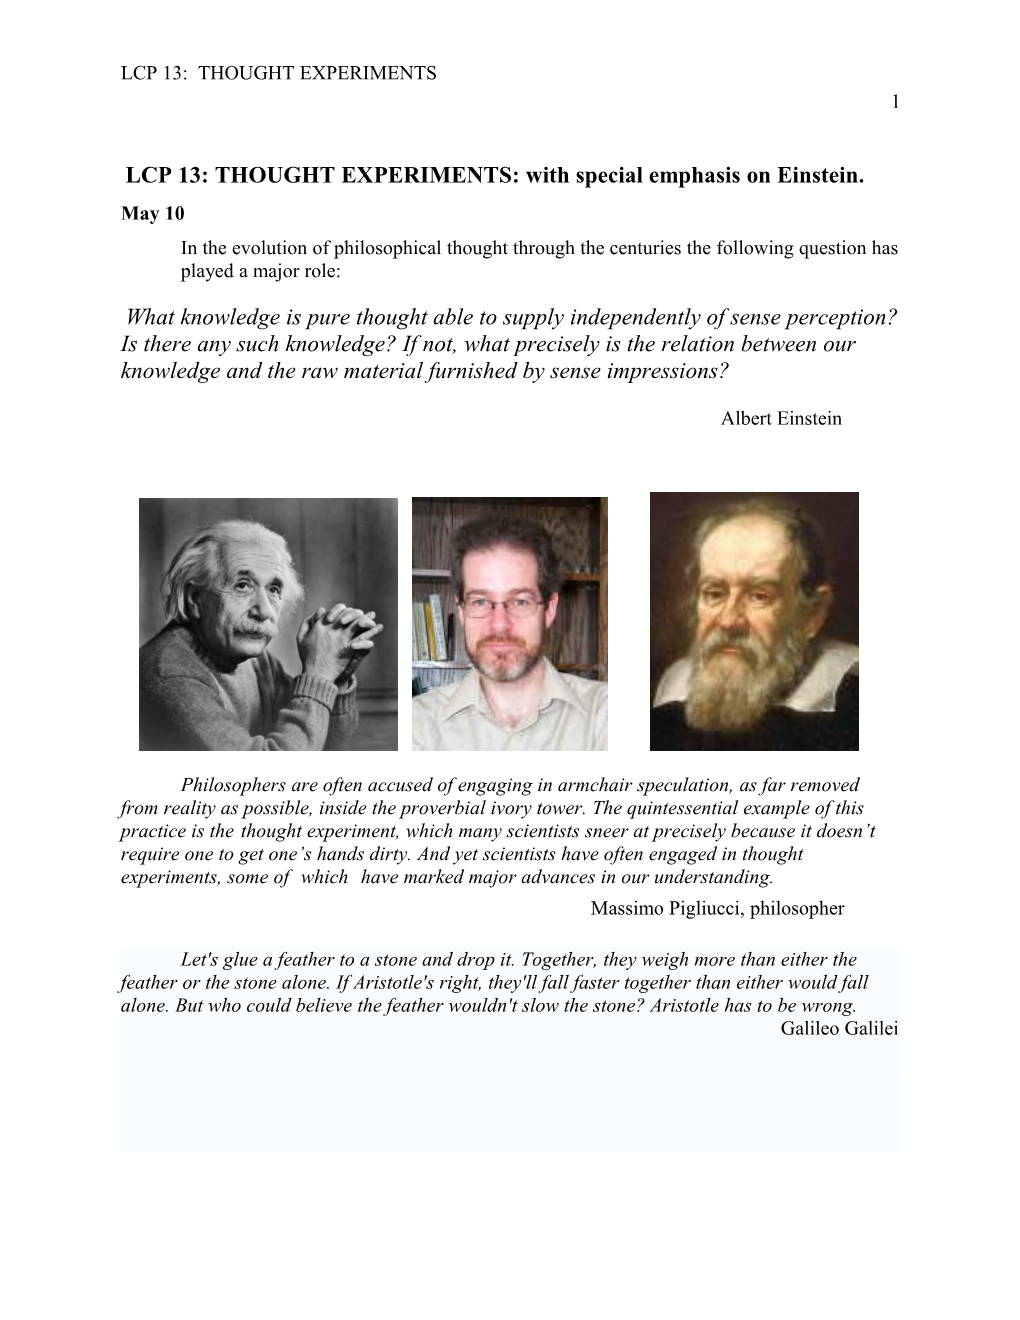 Thought Experiments, Einstein, and Physics Education